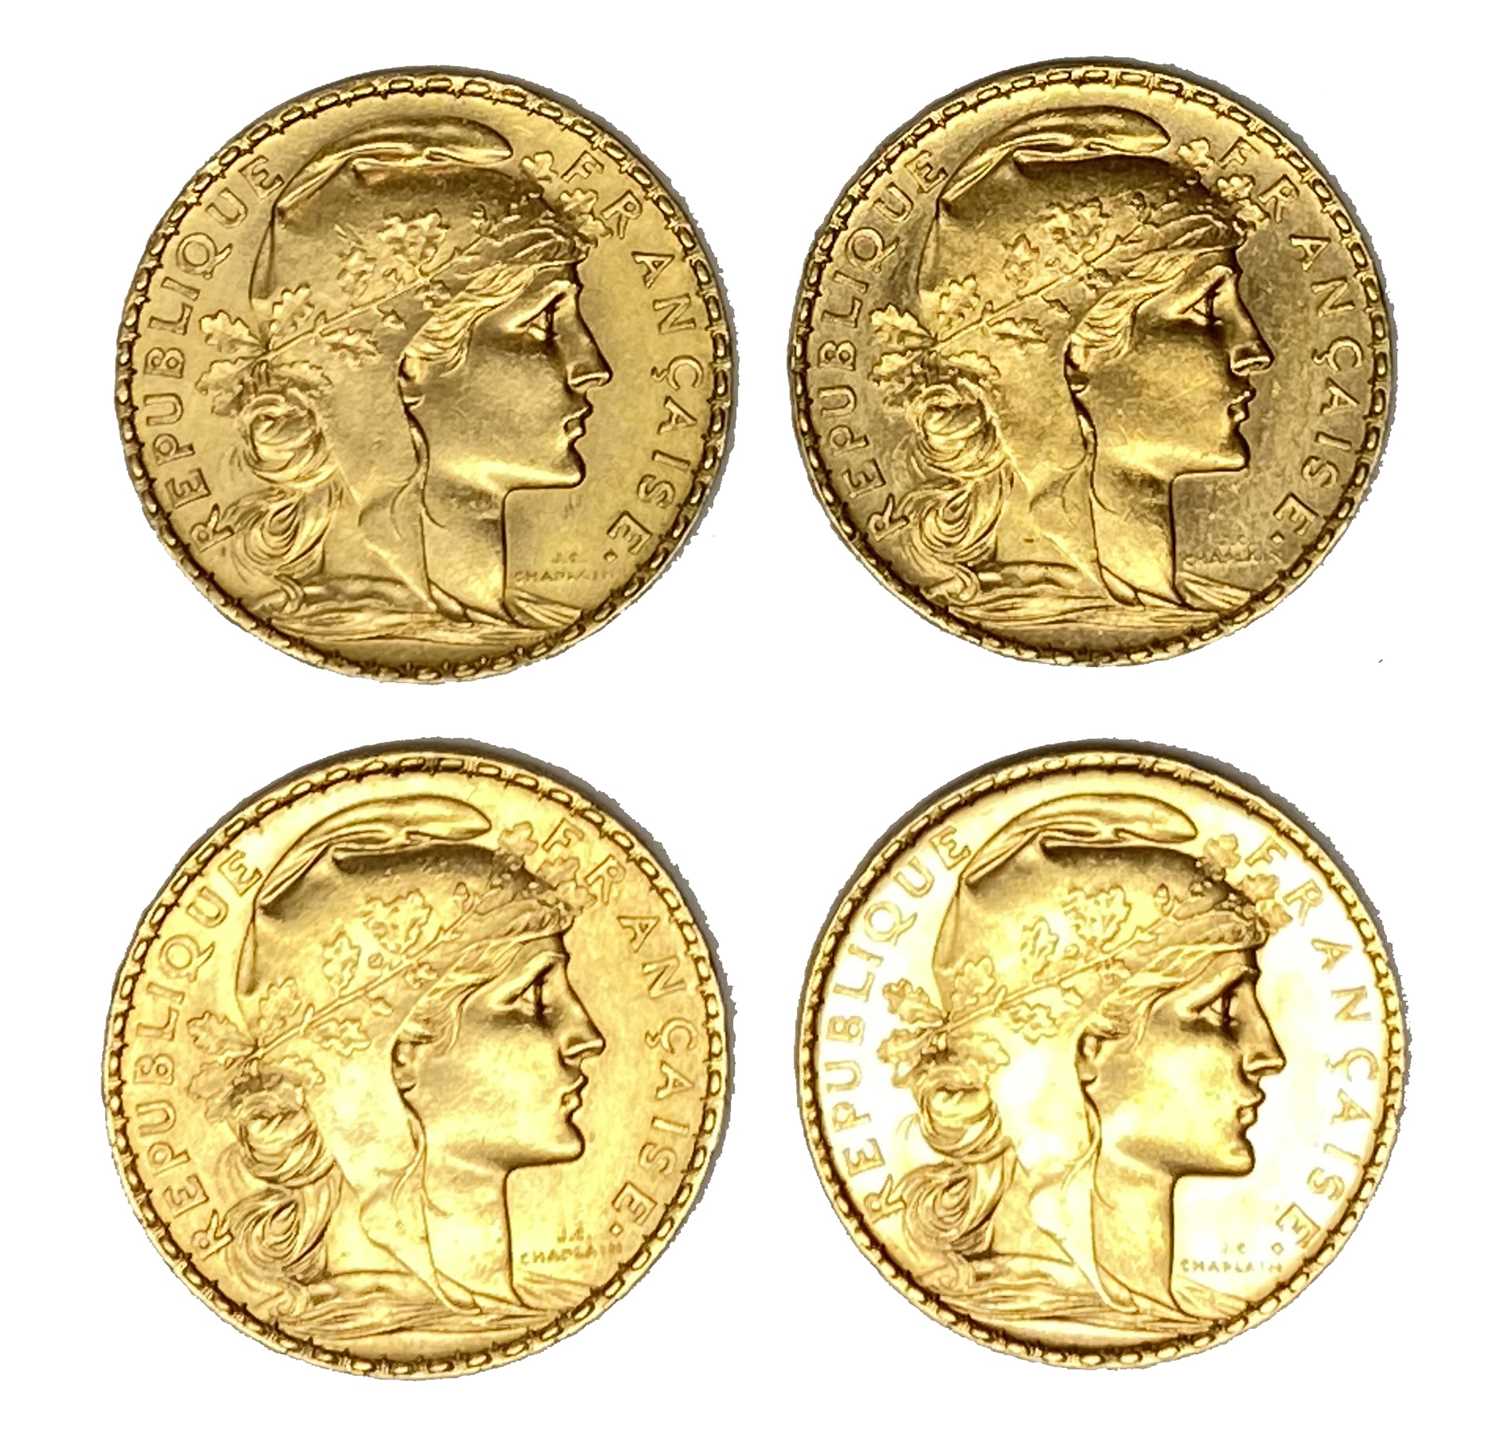 Lot 124 - French Republic four 20 Franc gold coins, 1905